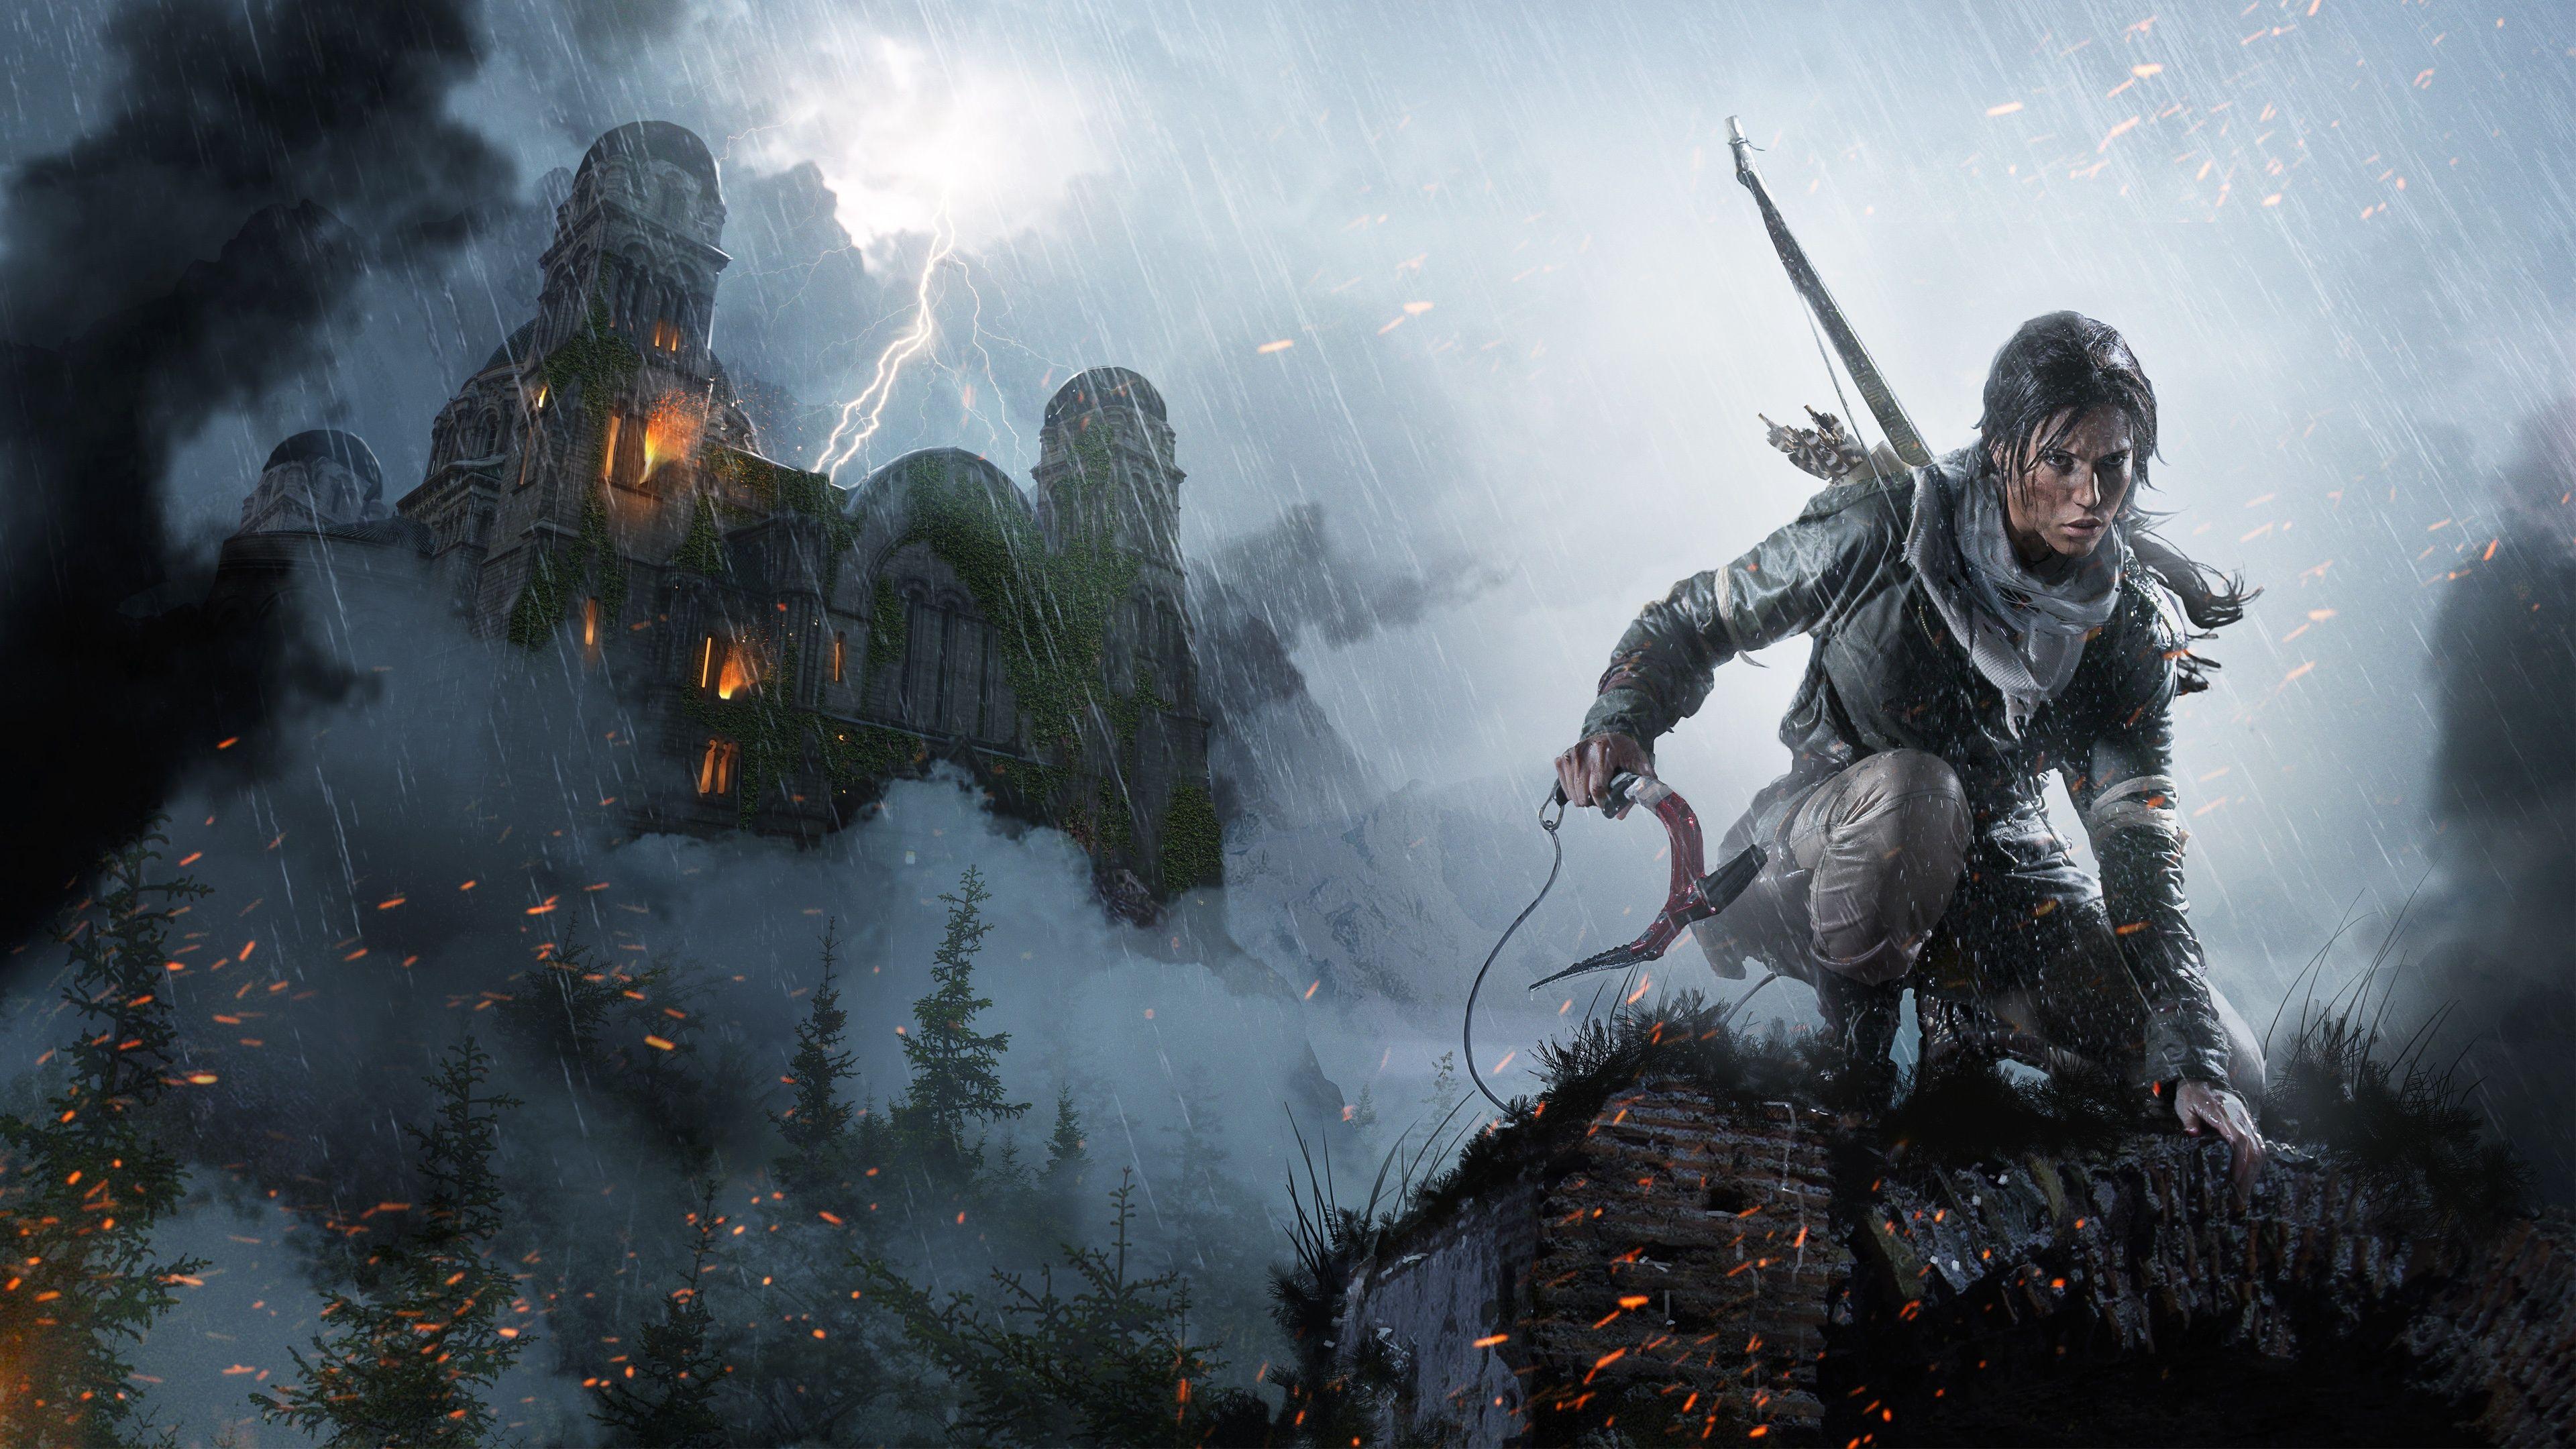 Rise of the Tomb Raider 4K, 1080p and 720p Ultra HD Wallpaper